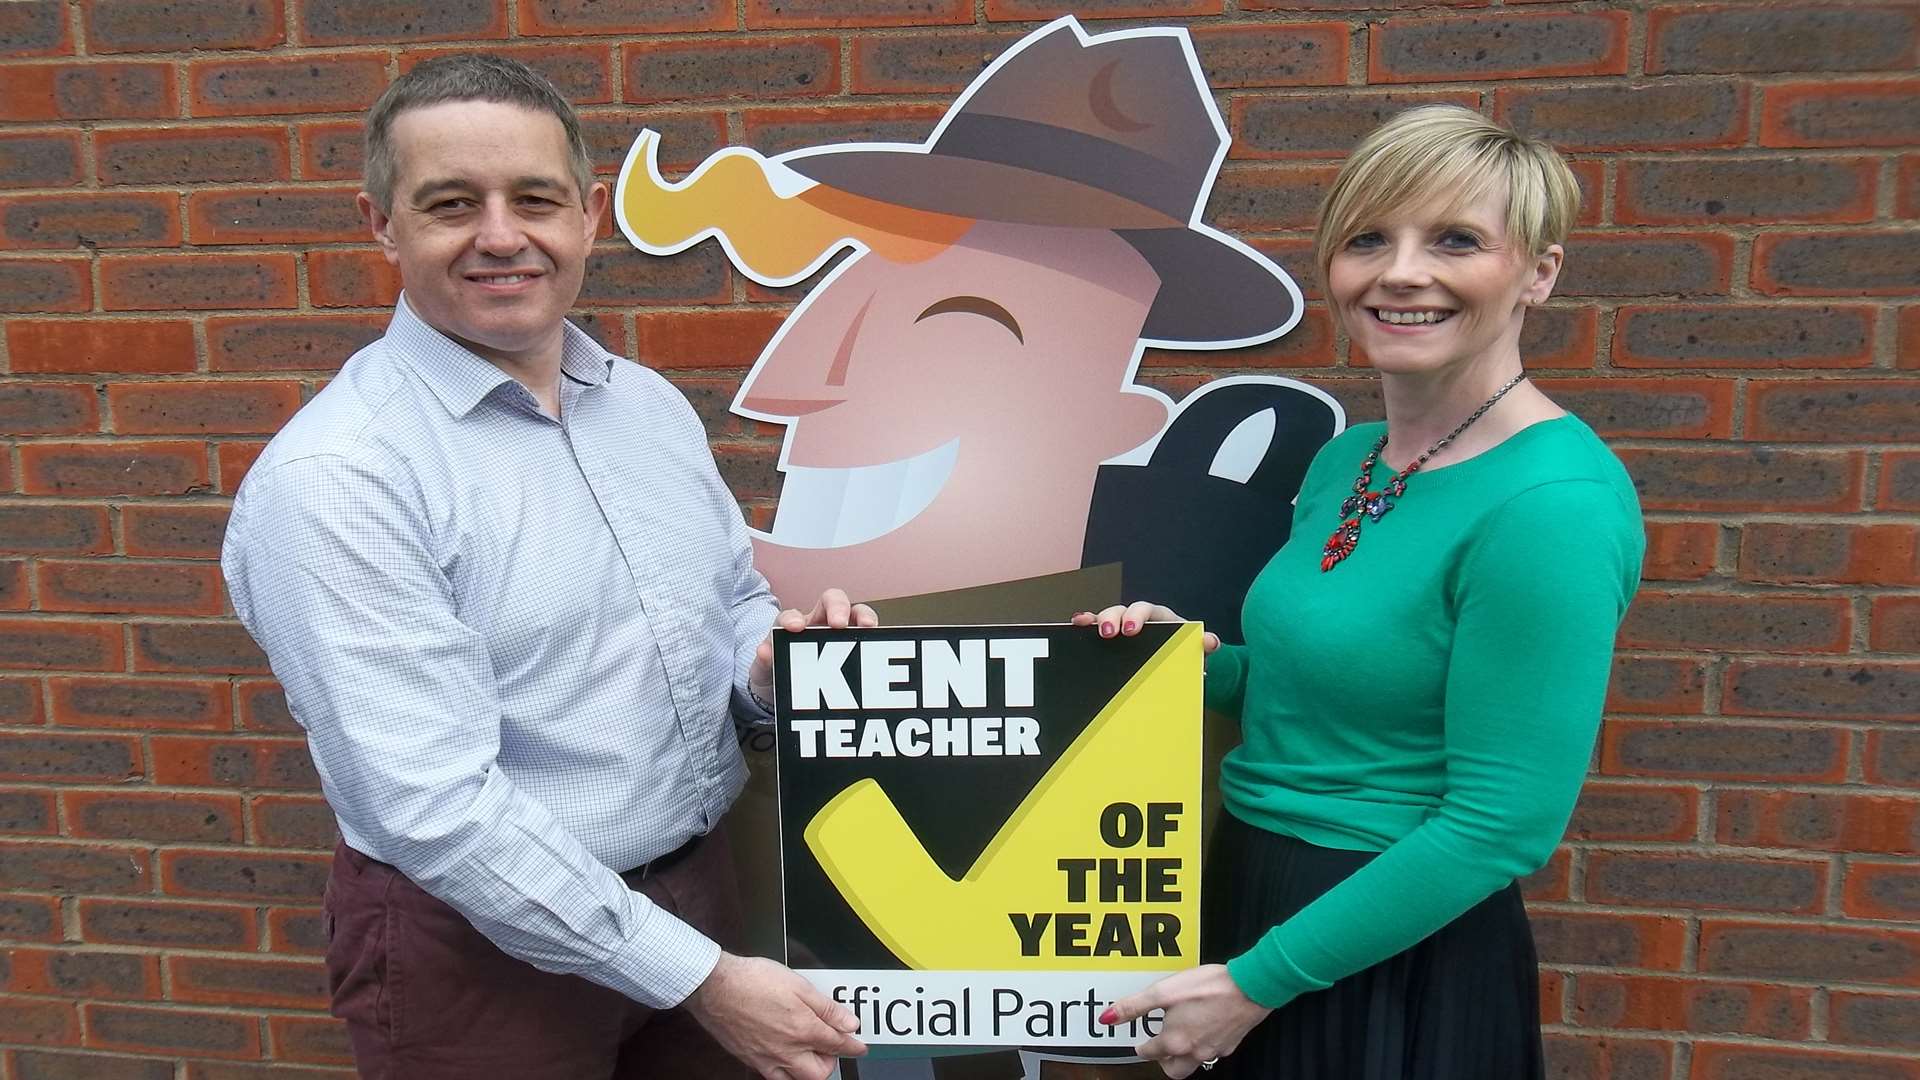 Andrew and Rita Lawrence from Questor Insurance, with company mascot Quentin Questor, are supporting the Kent Teacher of the Year Awards